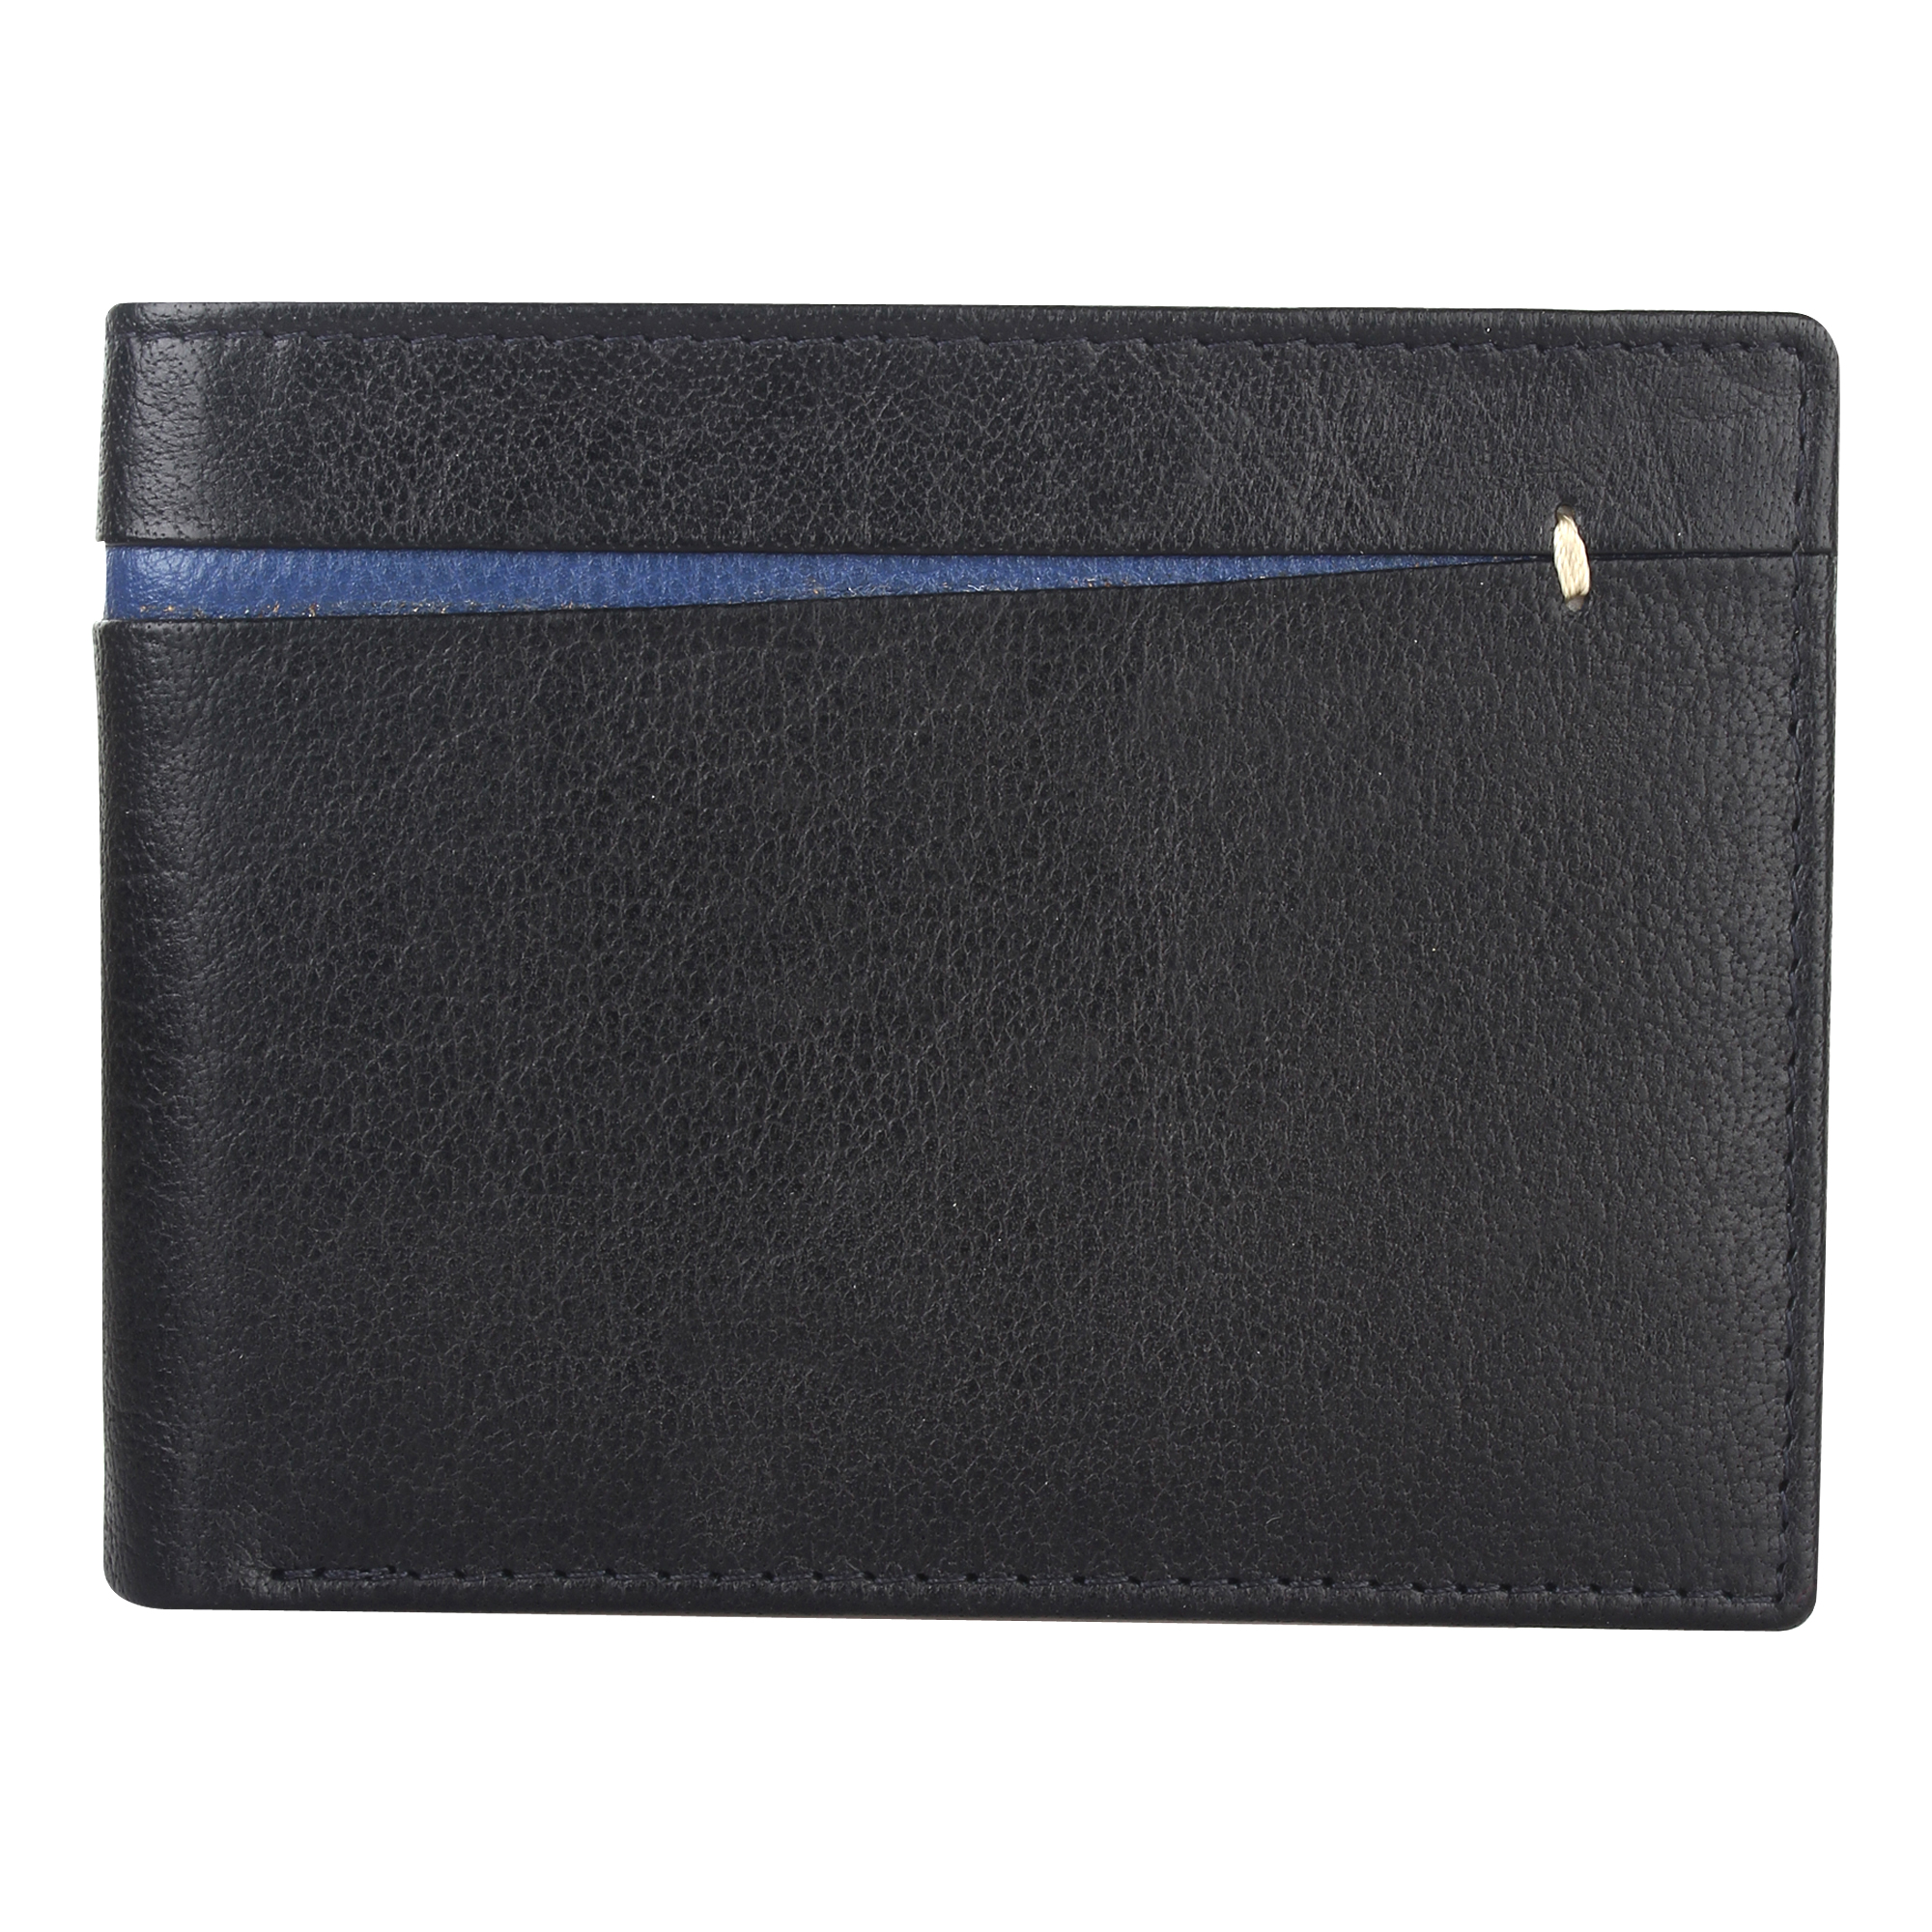 Leather Wallets Manufacturers in Delhi, Leather Wallets Suppliers in Delhi, Leather Wallets Wholesalers in Delhi, Leather Wallets Traders in Delhi 